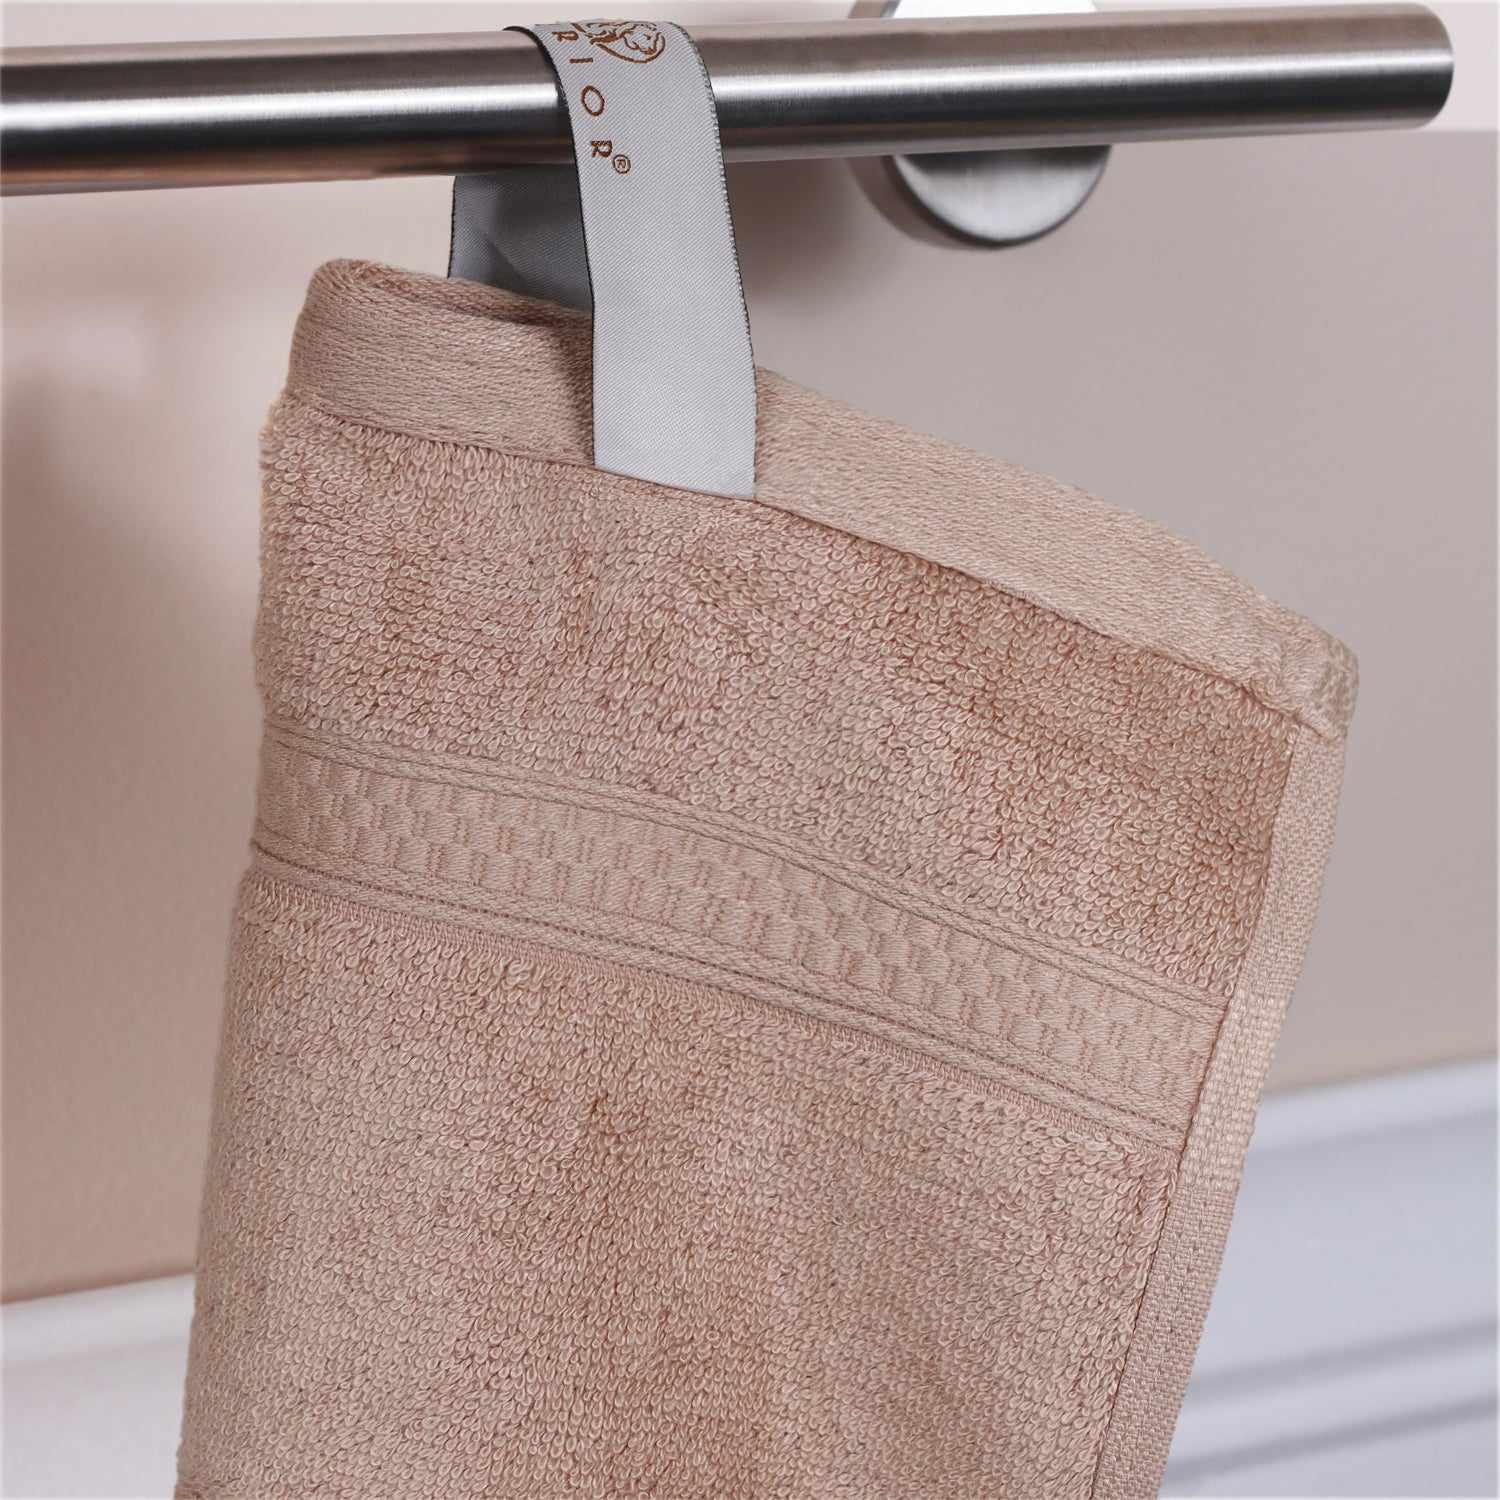  Ultra-Soft Hypoallergenic Rayon from Bamboo Cotton Blend Assorted Bath Towel Set -  Sand'